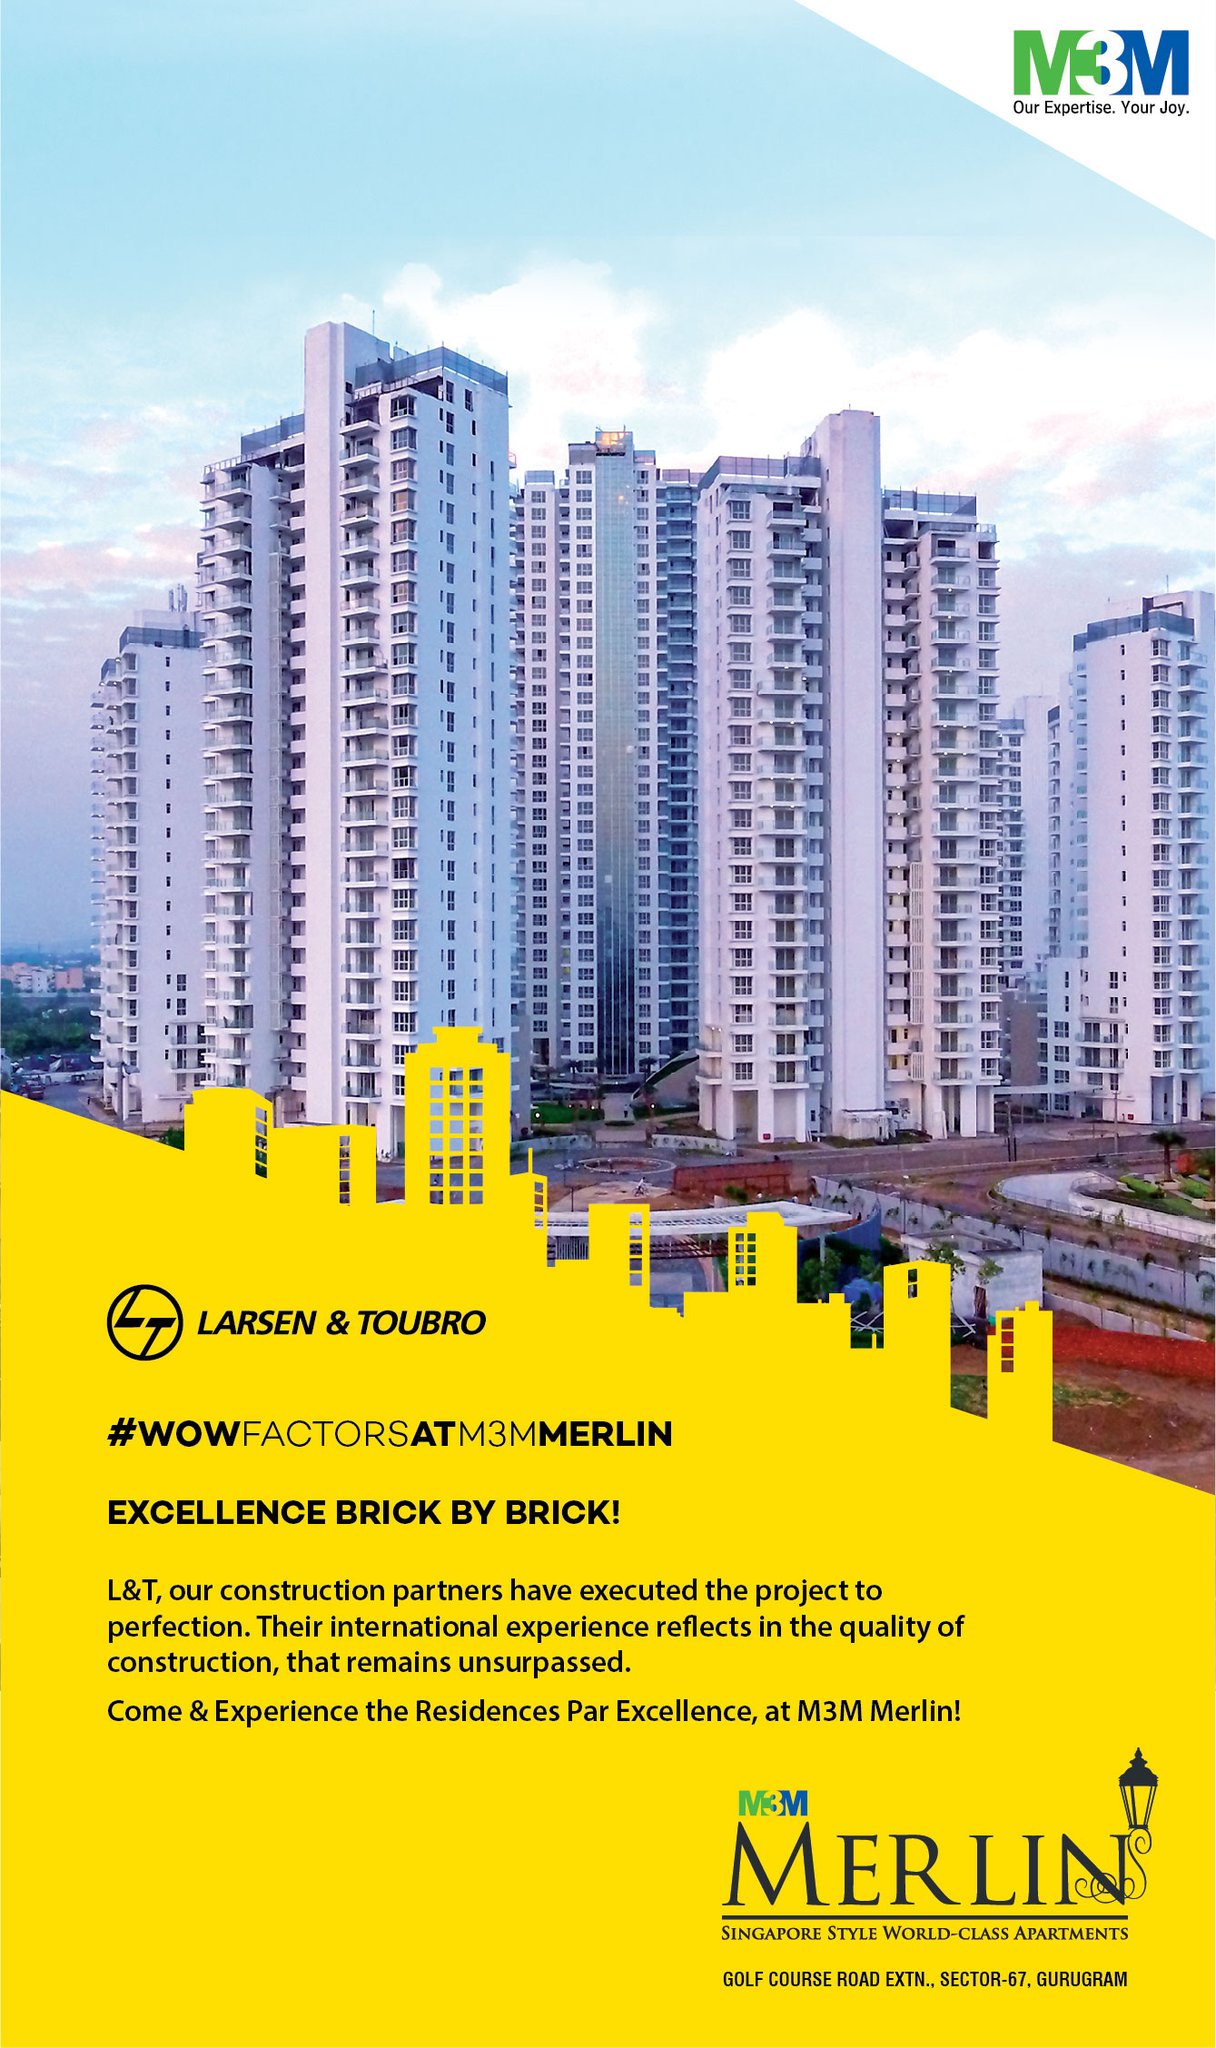 In M3M Merlin L&T have executed the project to perfection, brick by brick Update